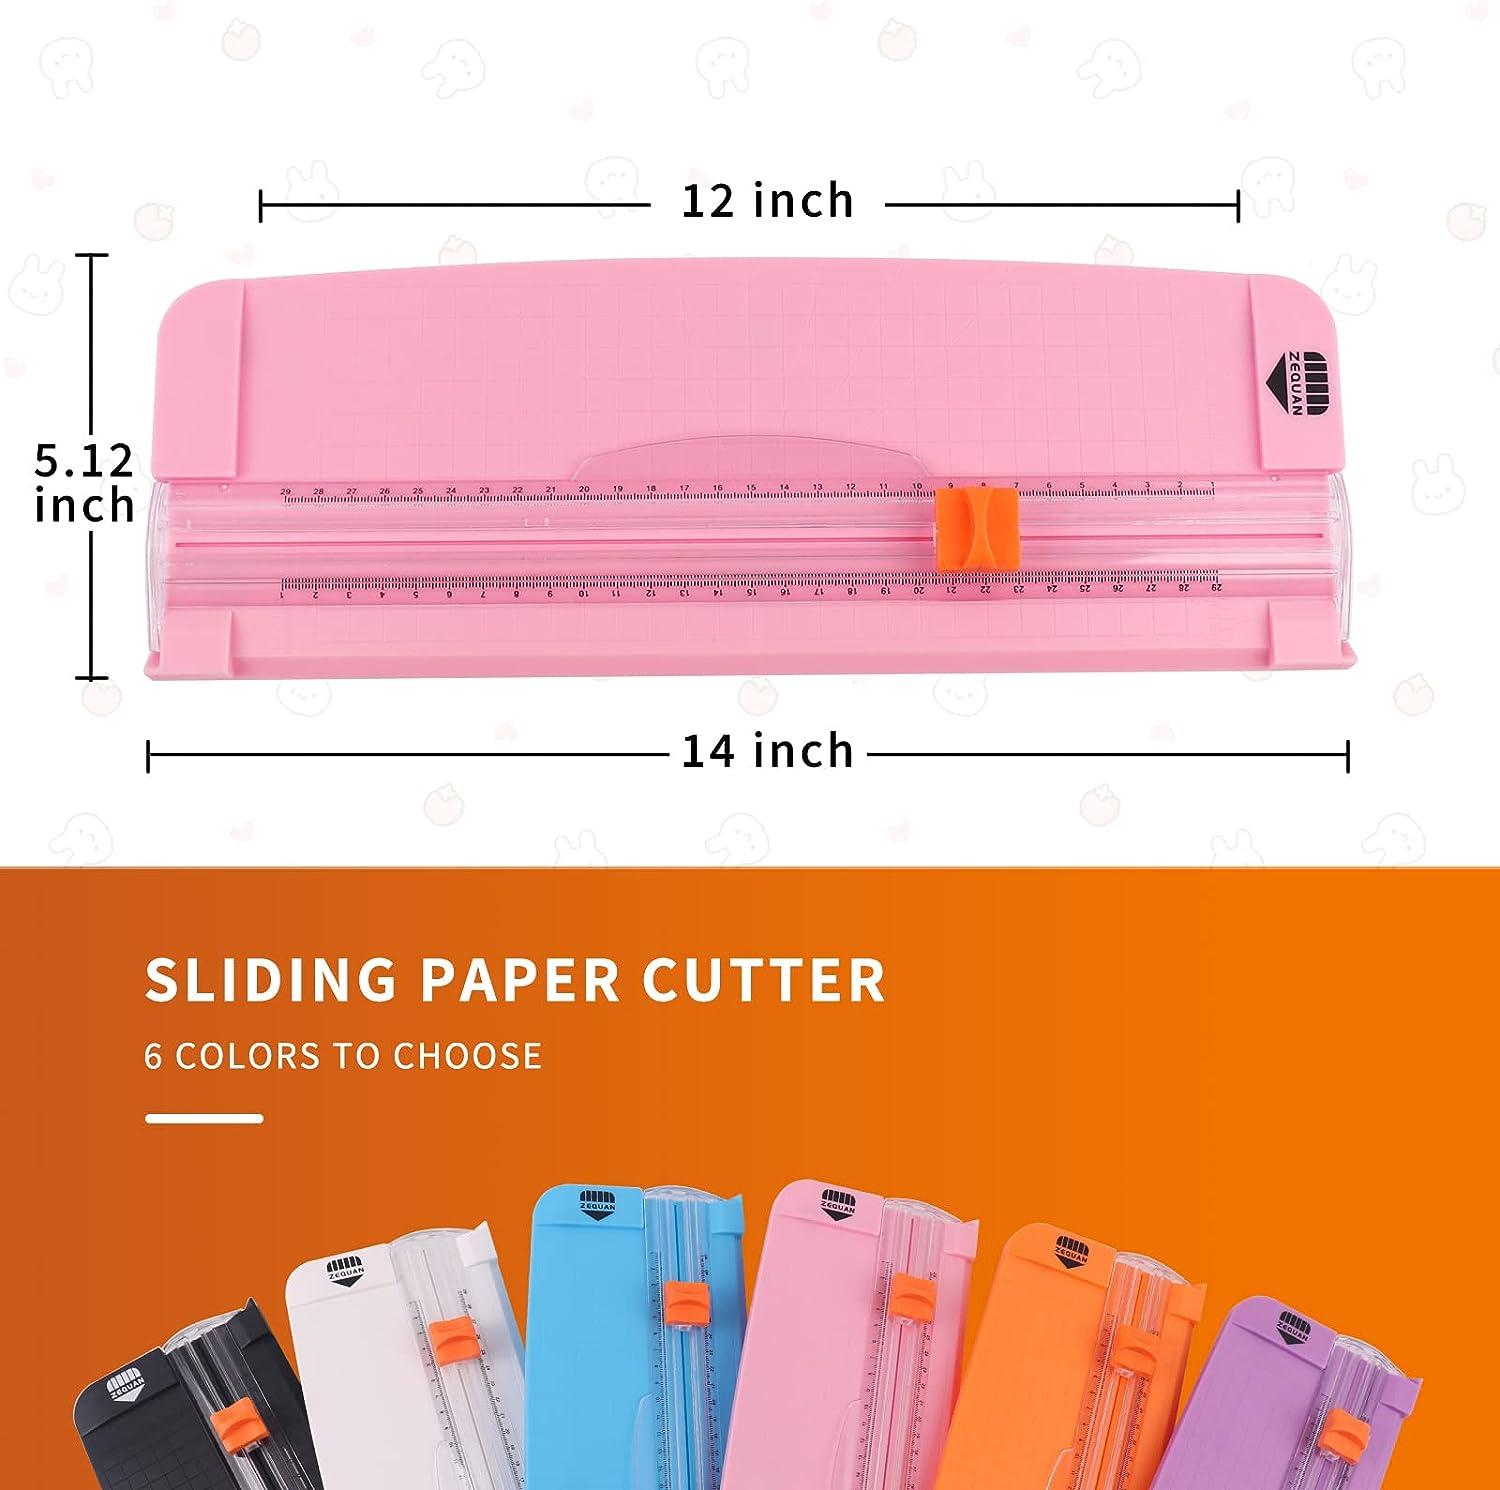 Paper Trimmer - Craft Paper Cutter Scrapbooking Tool Mini Photo Cutter for  Cutting Photos A4 Paper,Coupons,Postcards,Scrapbook,Card